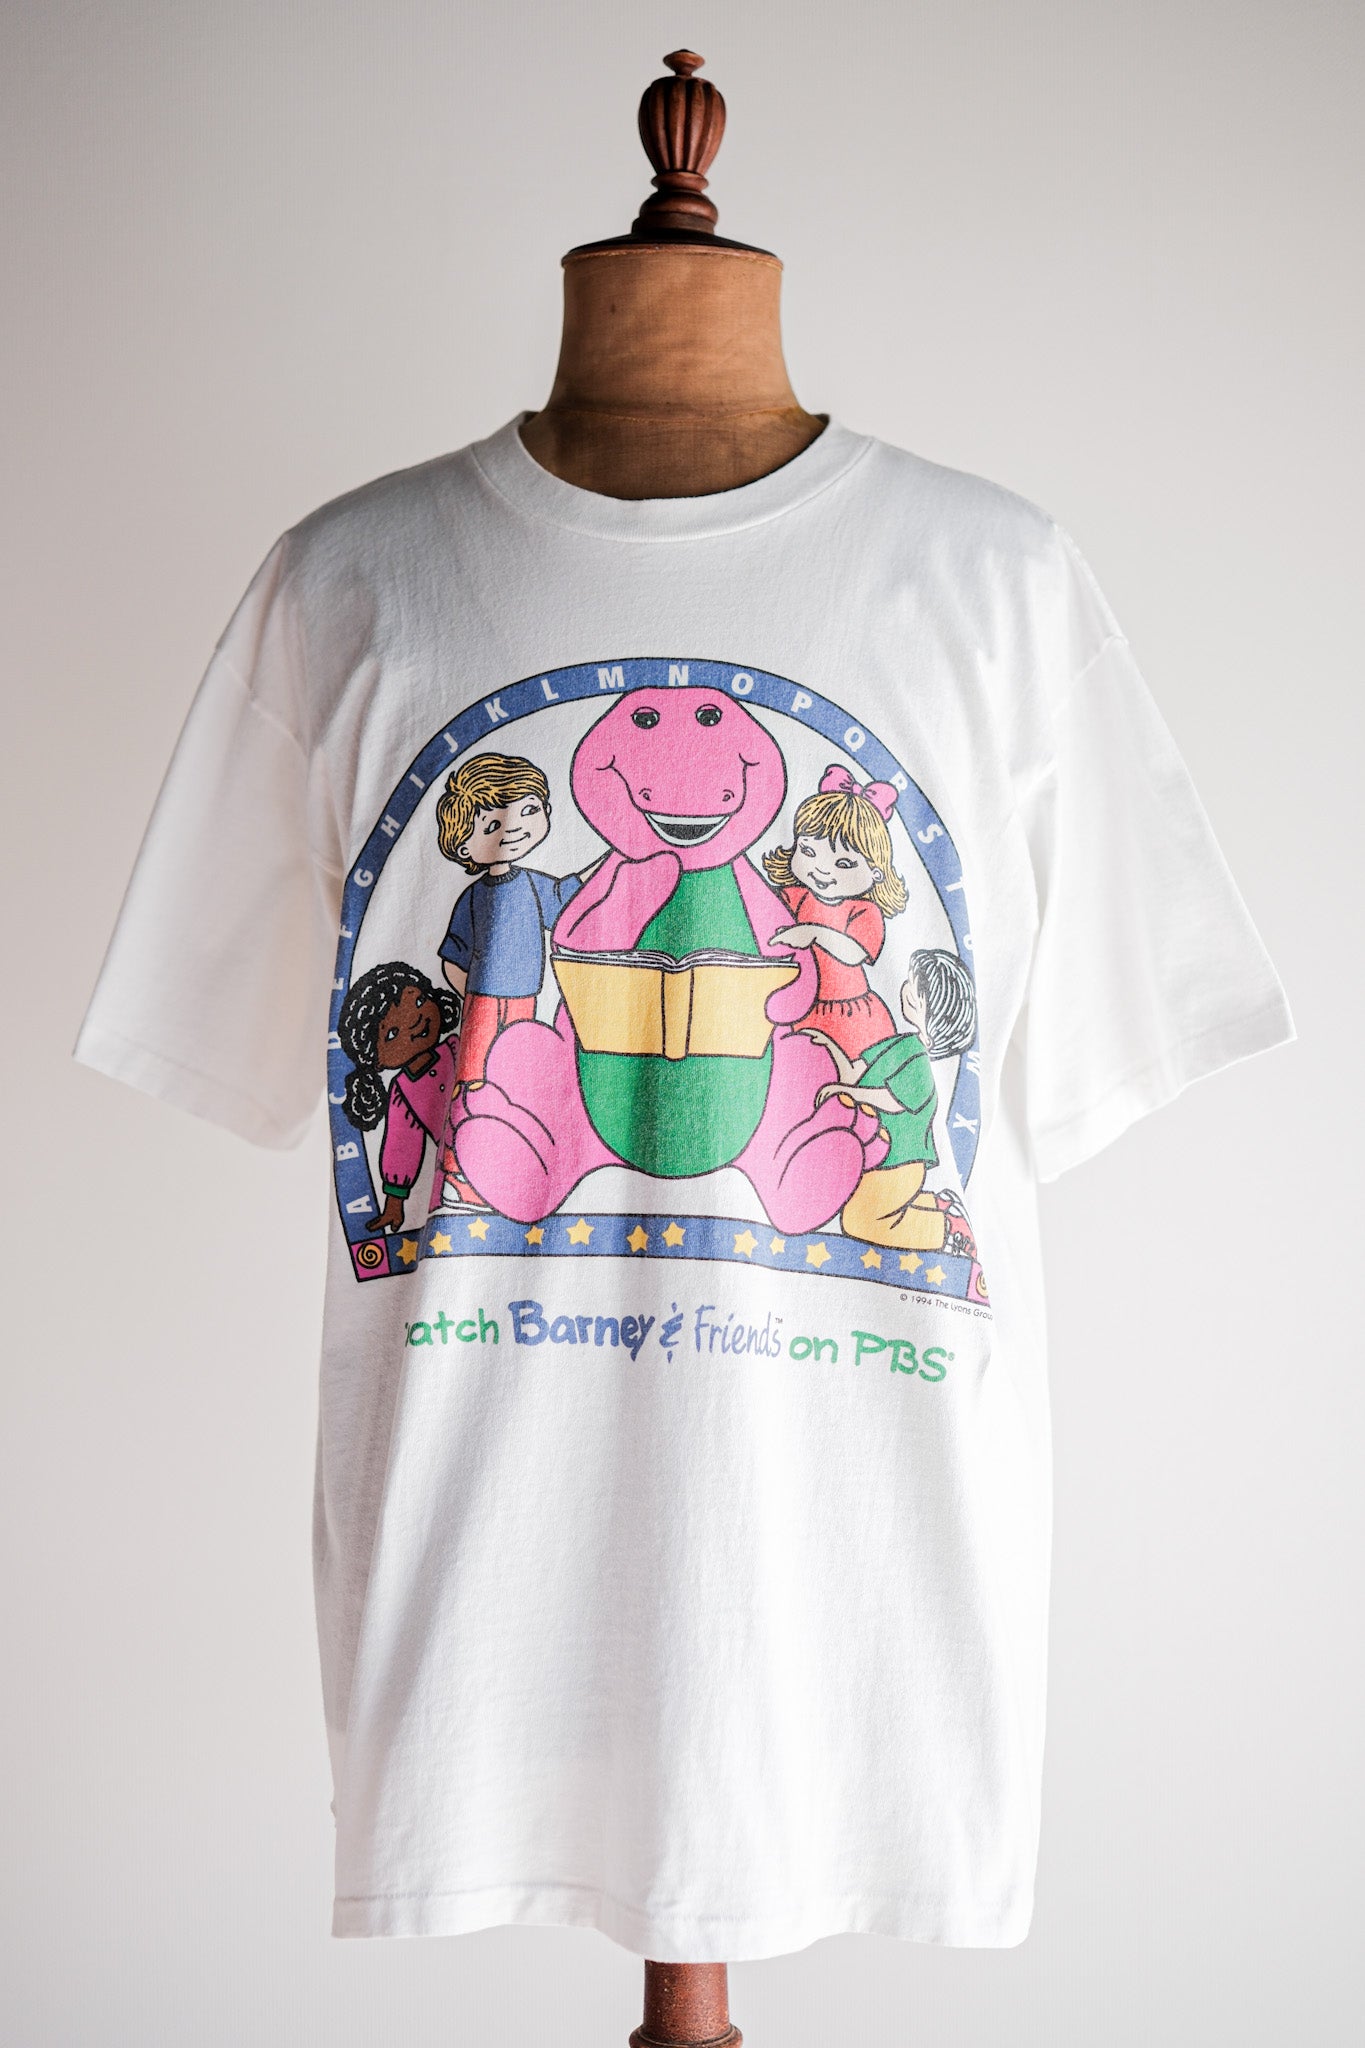 【~90's】Vintage TV Print T-shirt Size.XL "Barney & Friends" "Made in U.S.A."